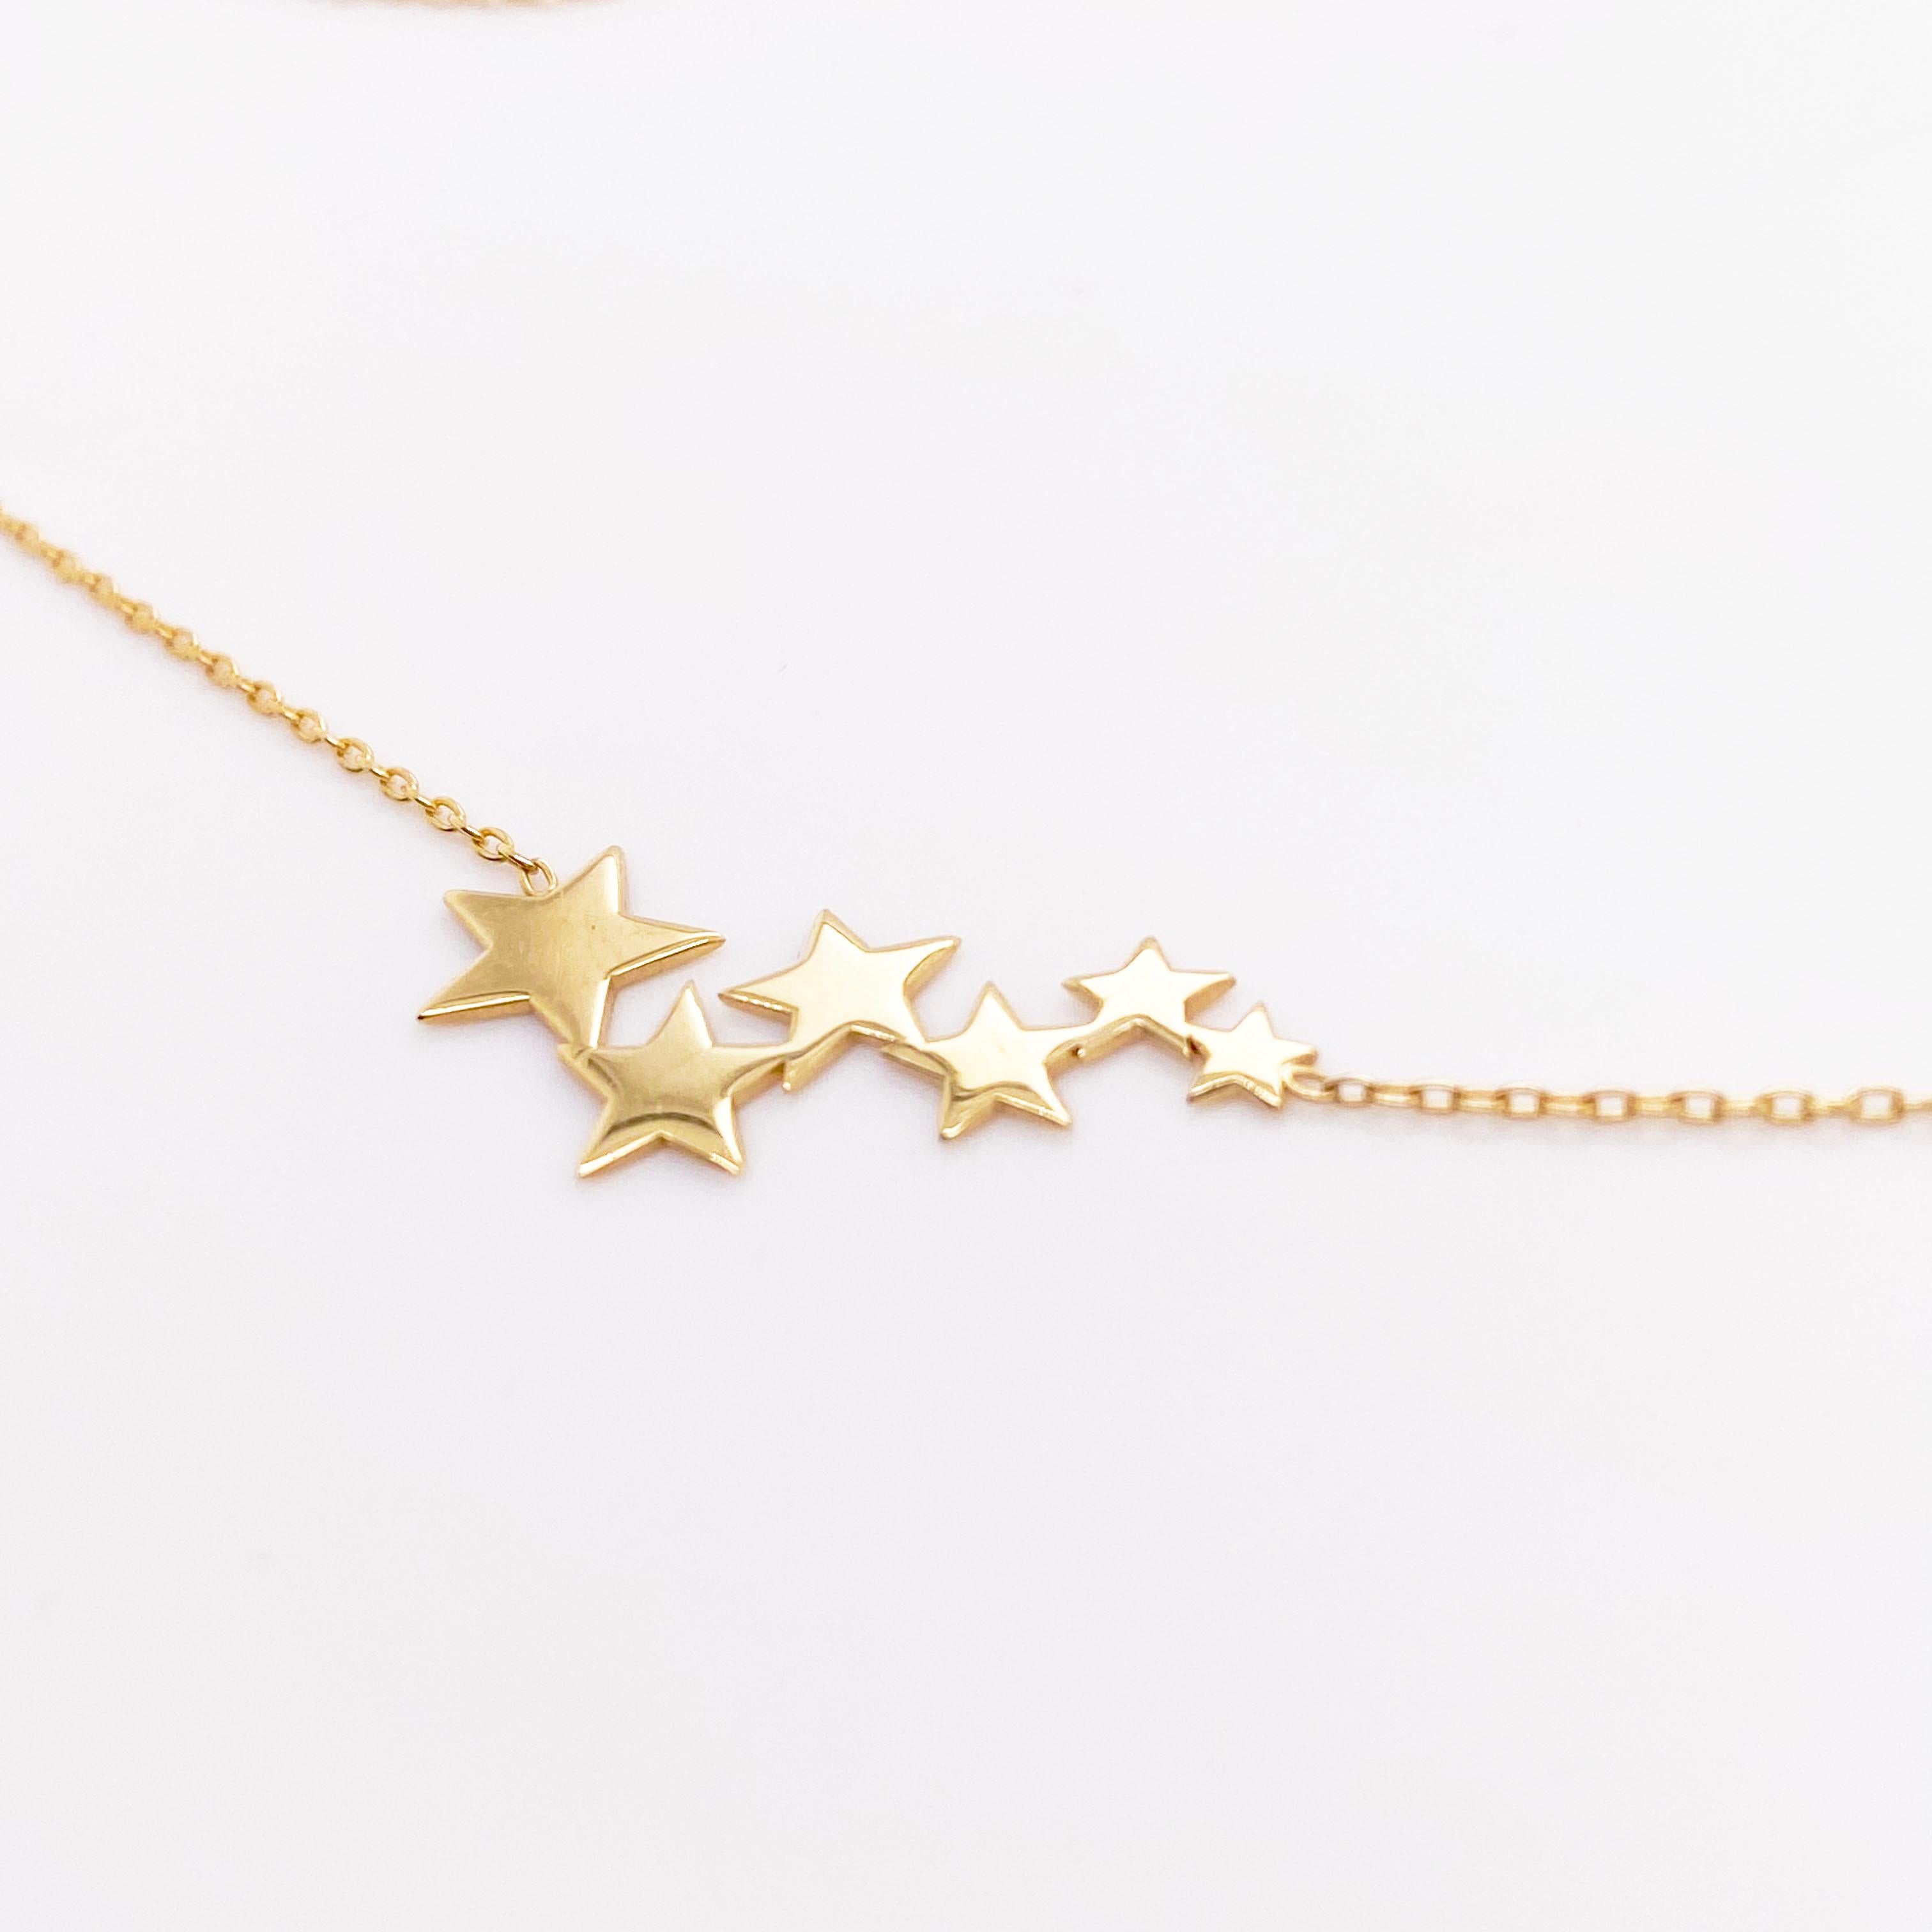 Contemporary Star Cluster Necklace w 6 Stars in 14K Yellow Gold w Adjustable Chain For Sale